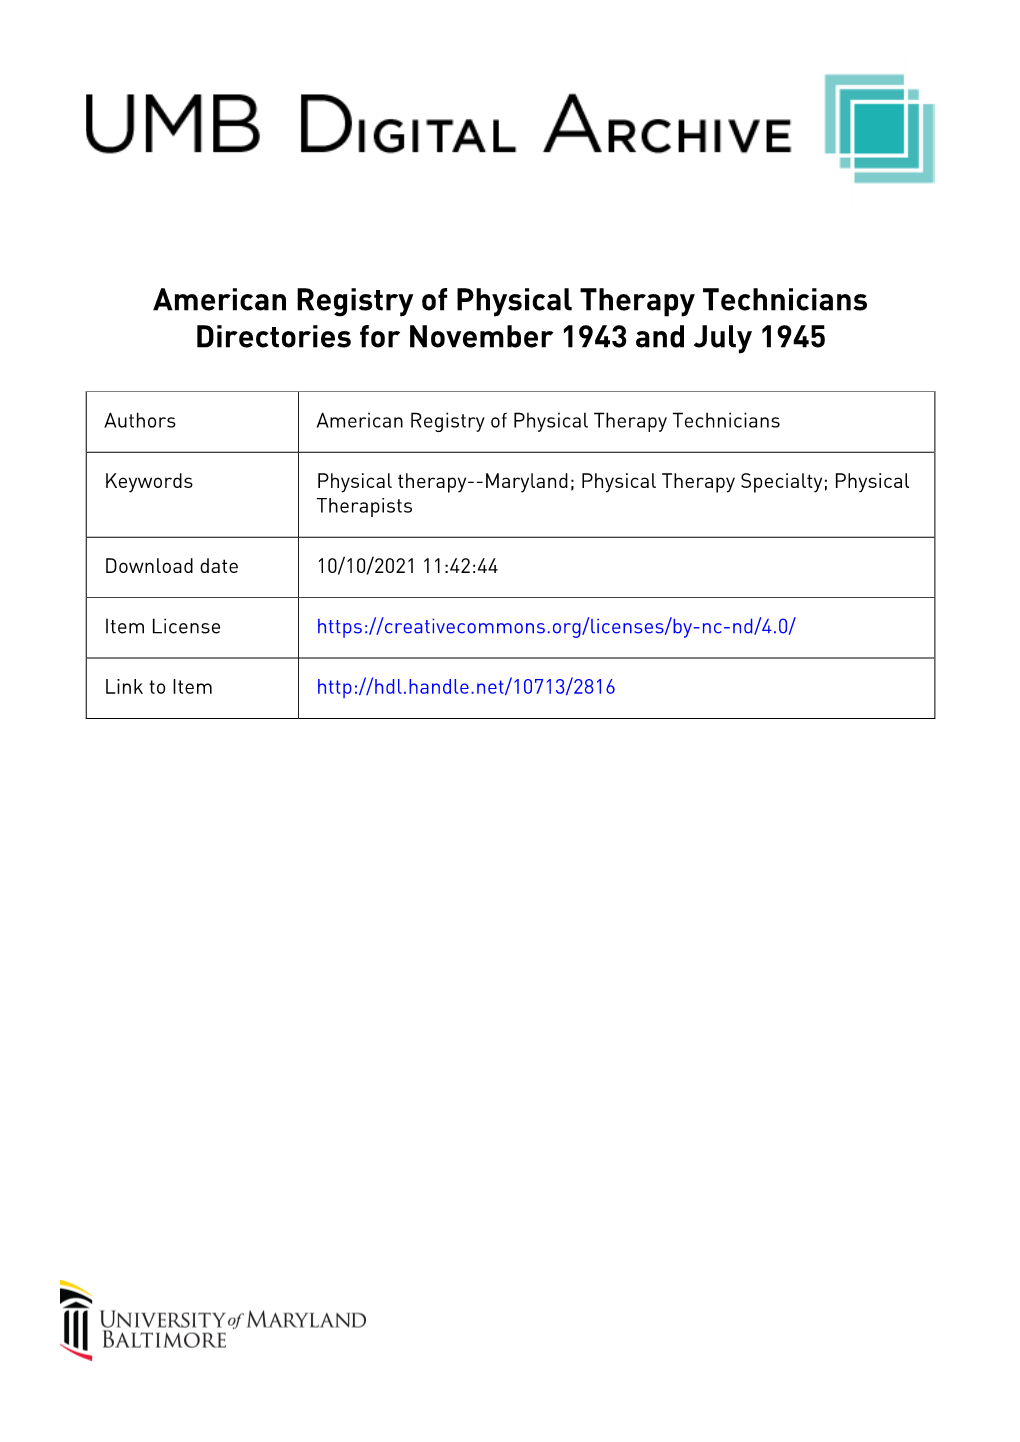 American Registry of Physical Therapy Technicians Directories for November 1943 and July 1945